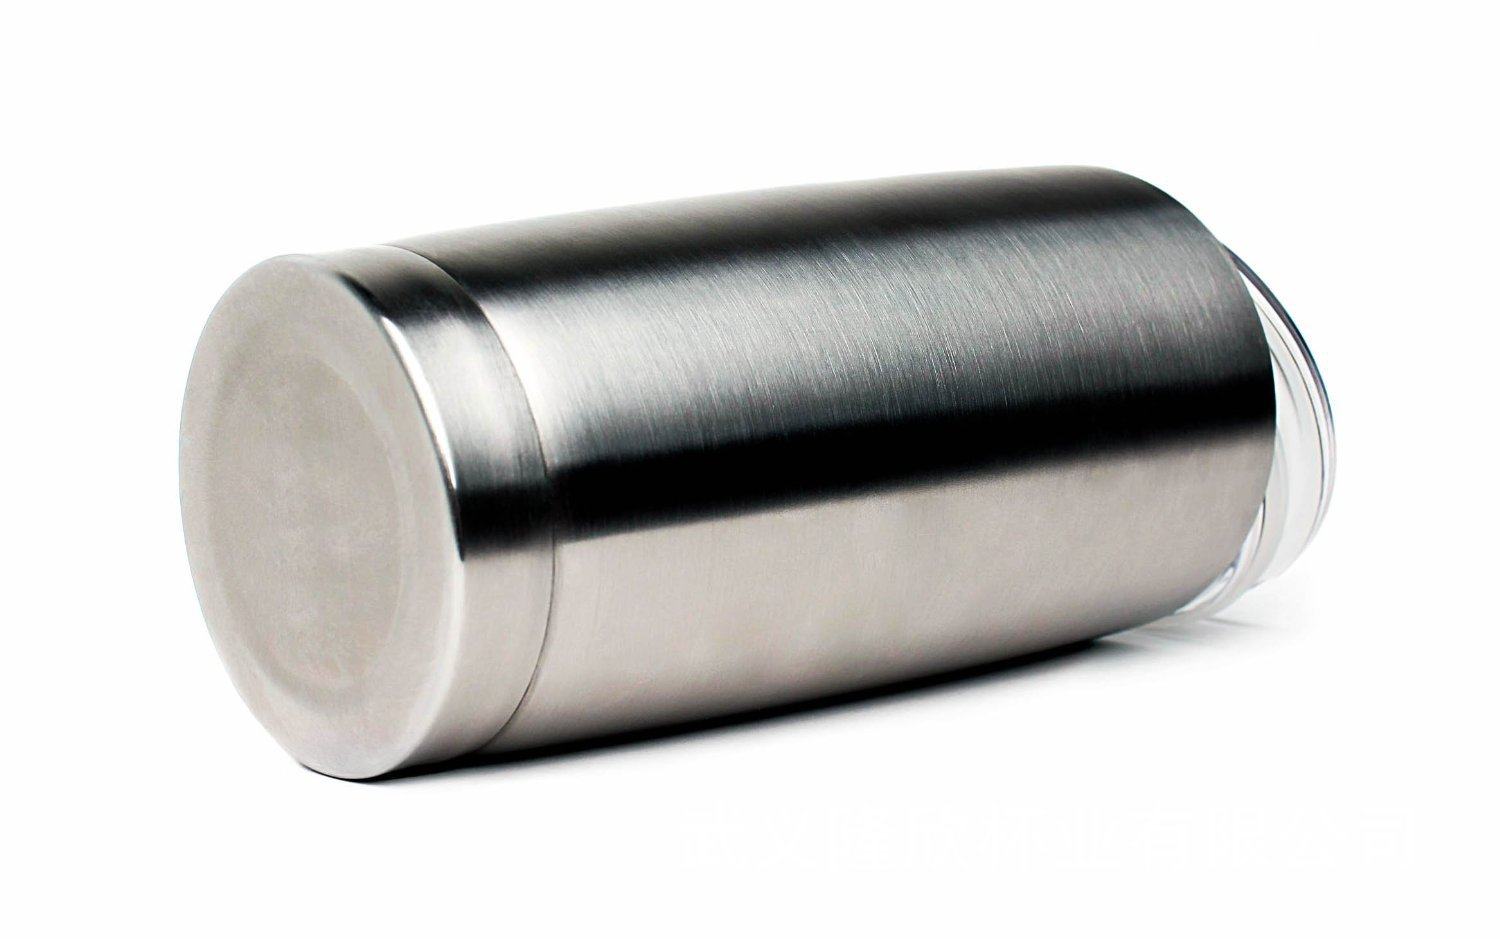 Stainless steel automobile cup|20oz